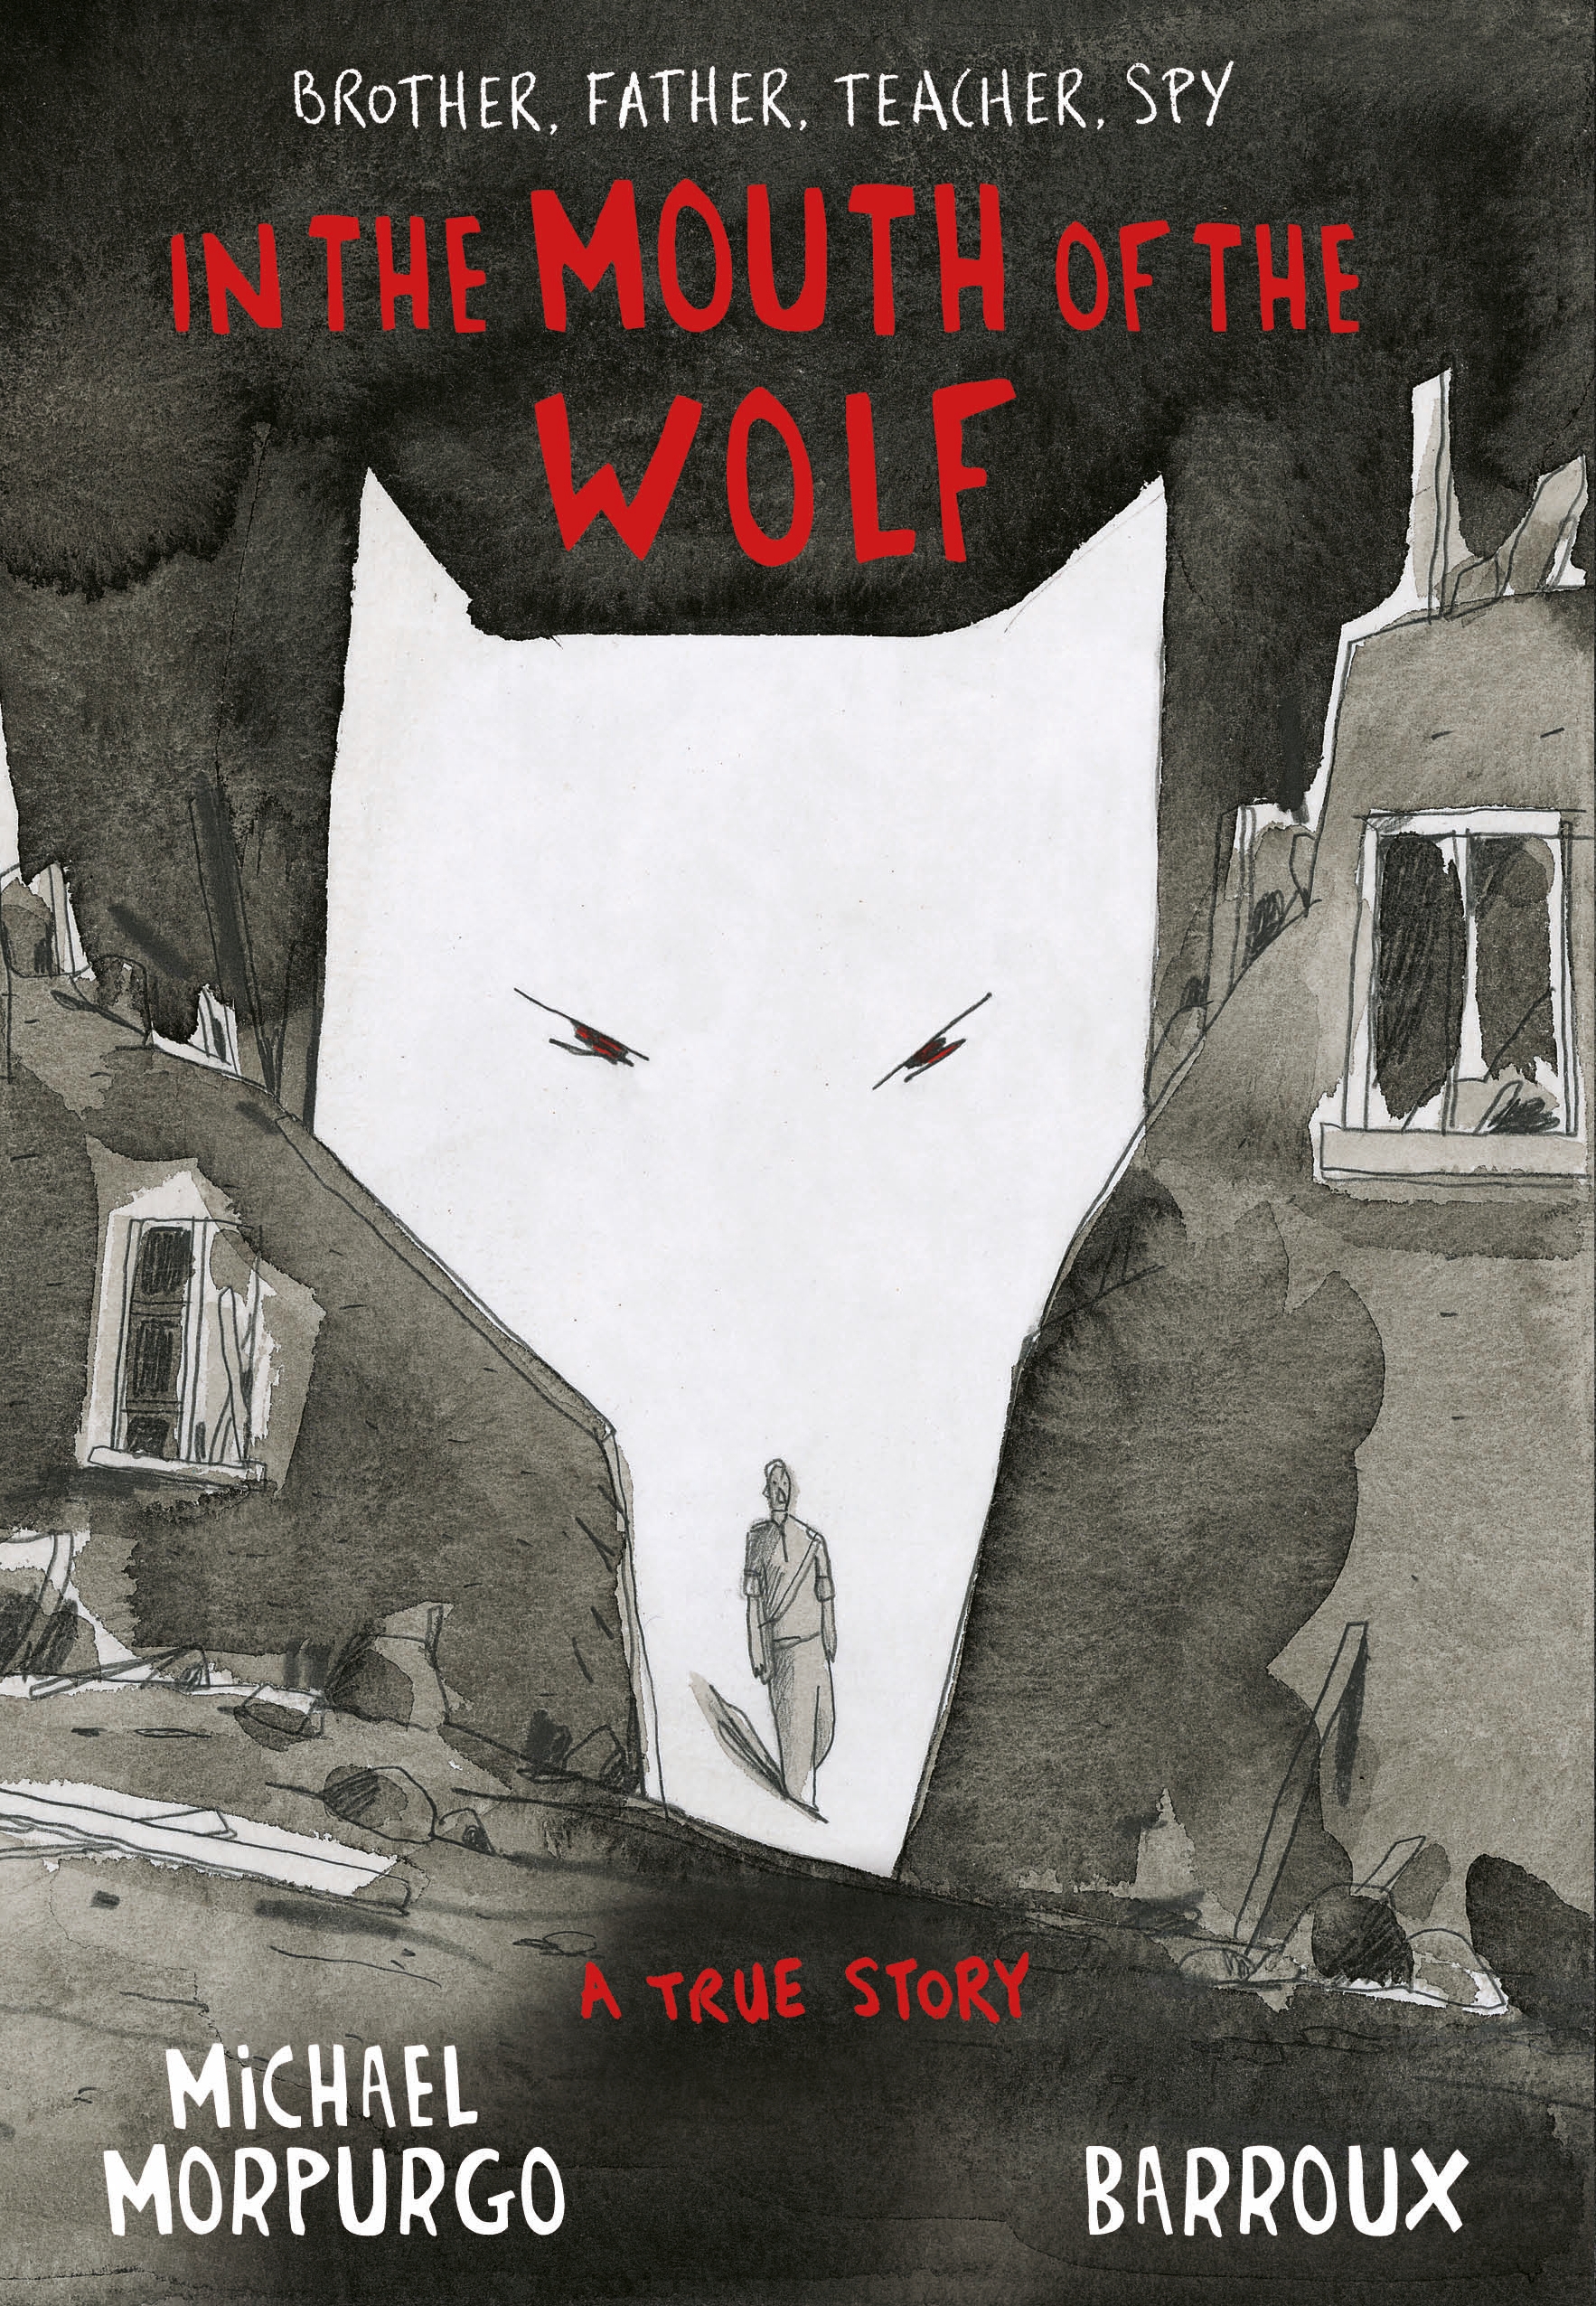 In the Mouth of the Wolf by Michael Morpurgo